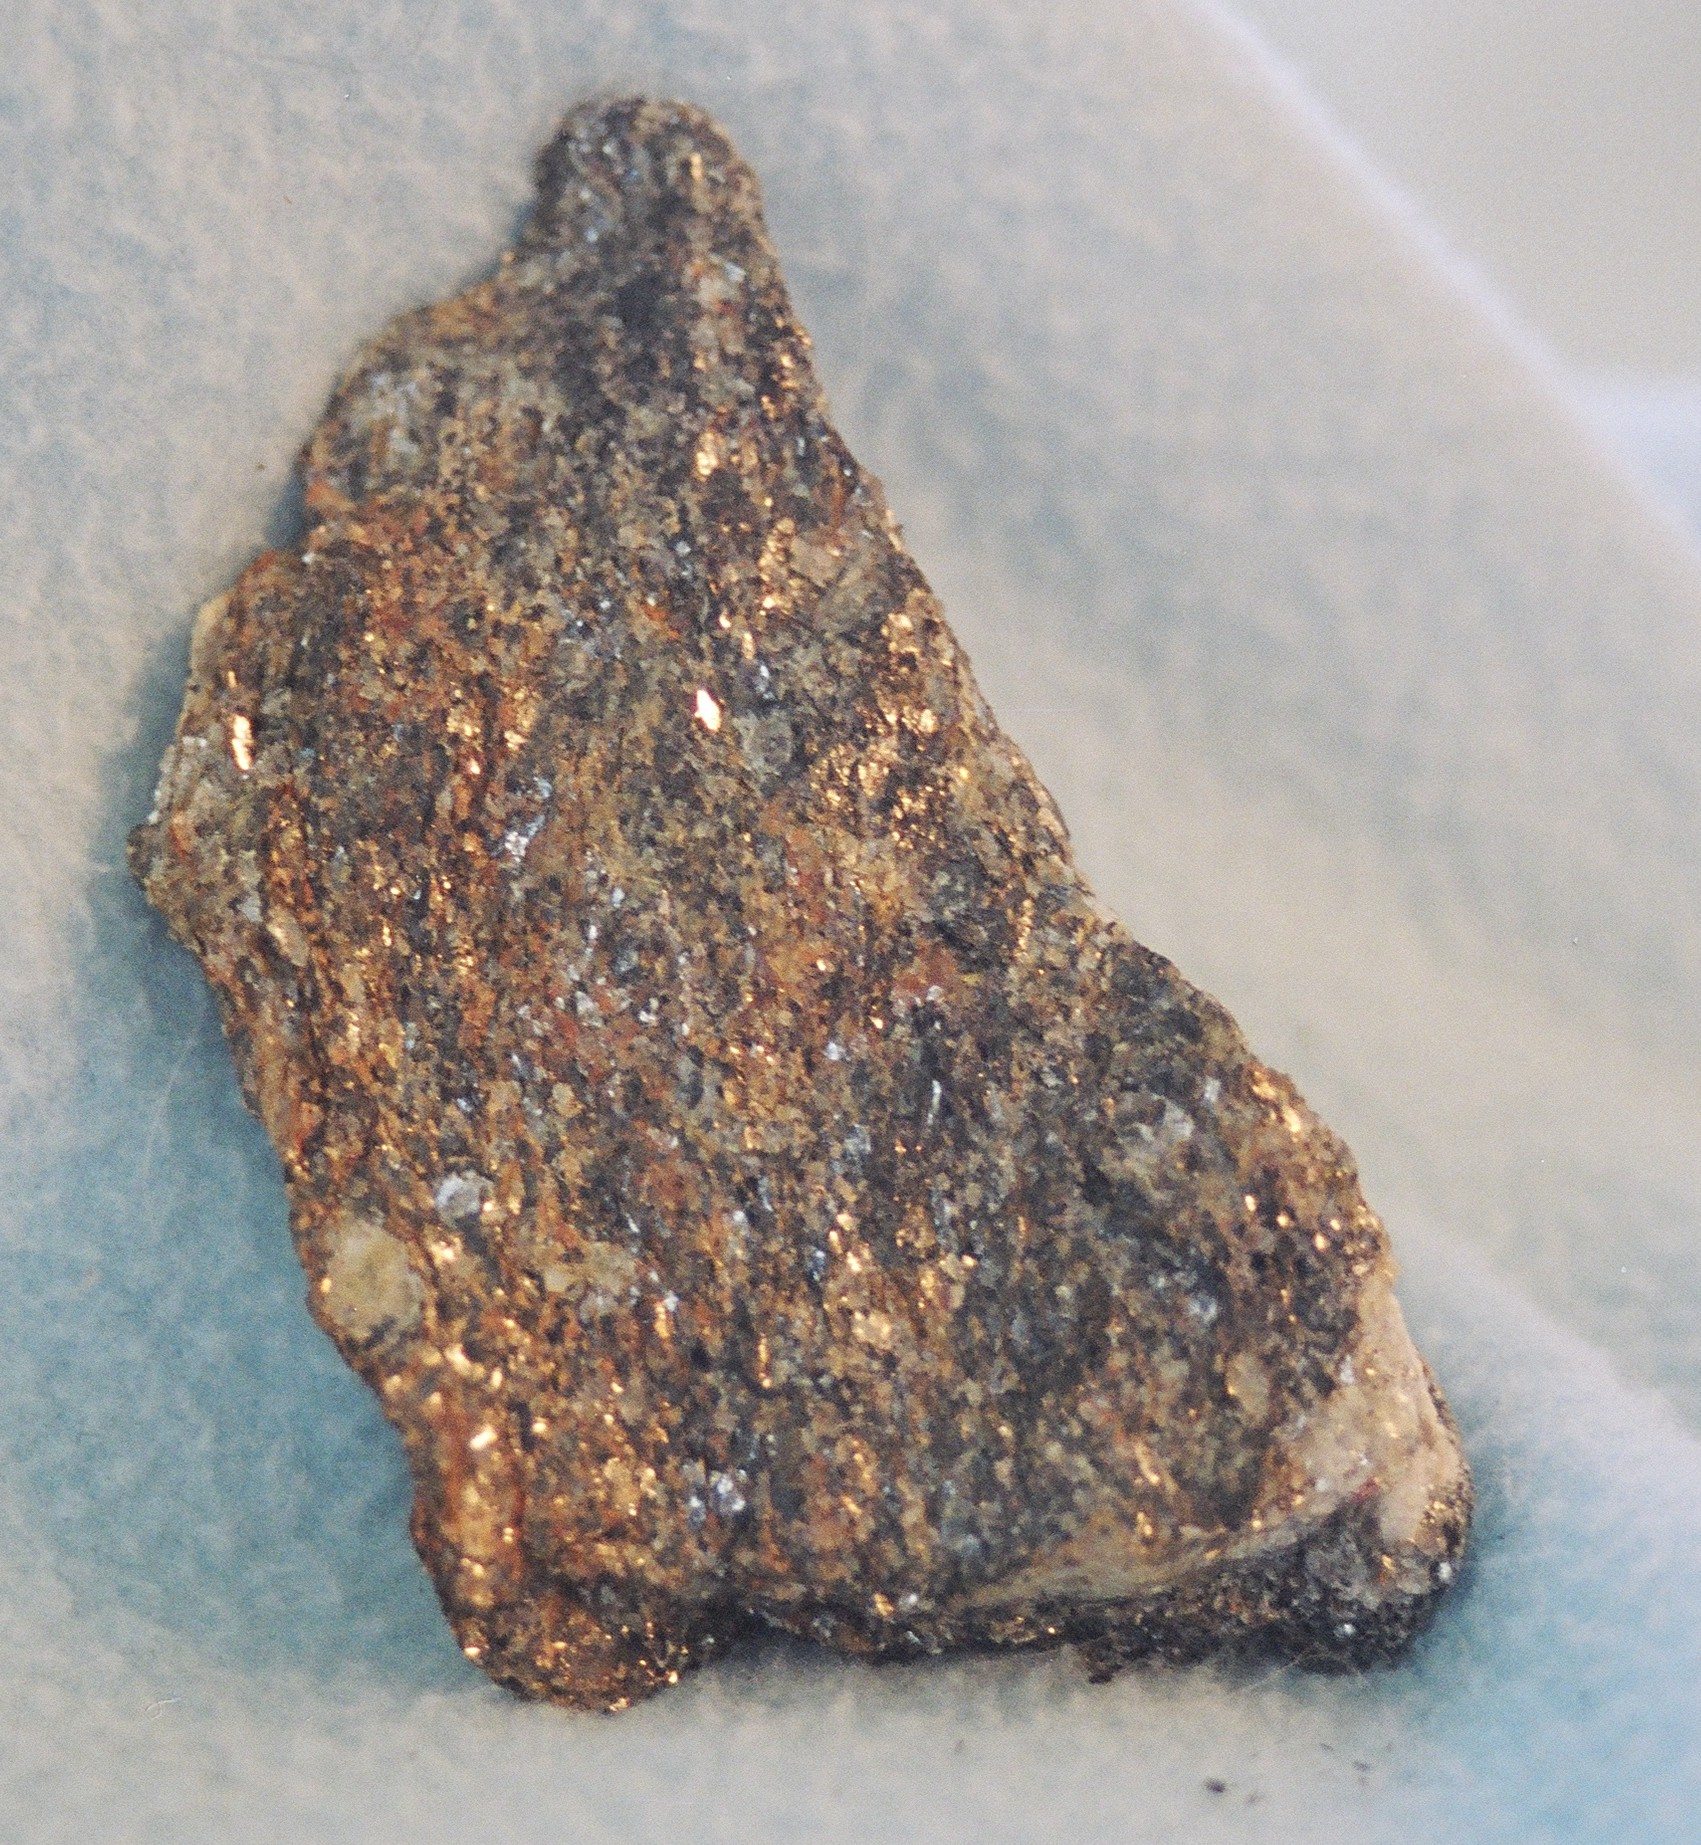 A photo of schist, a mineral used in the squares on the bottom of the Garden Pavilion.